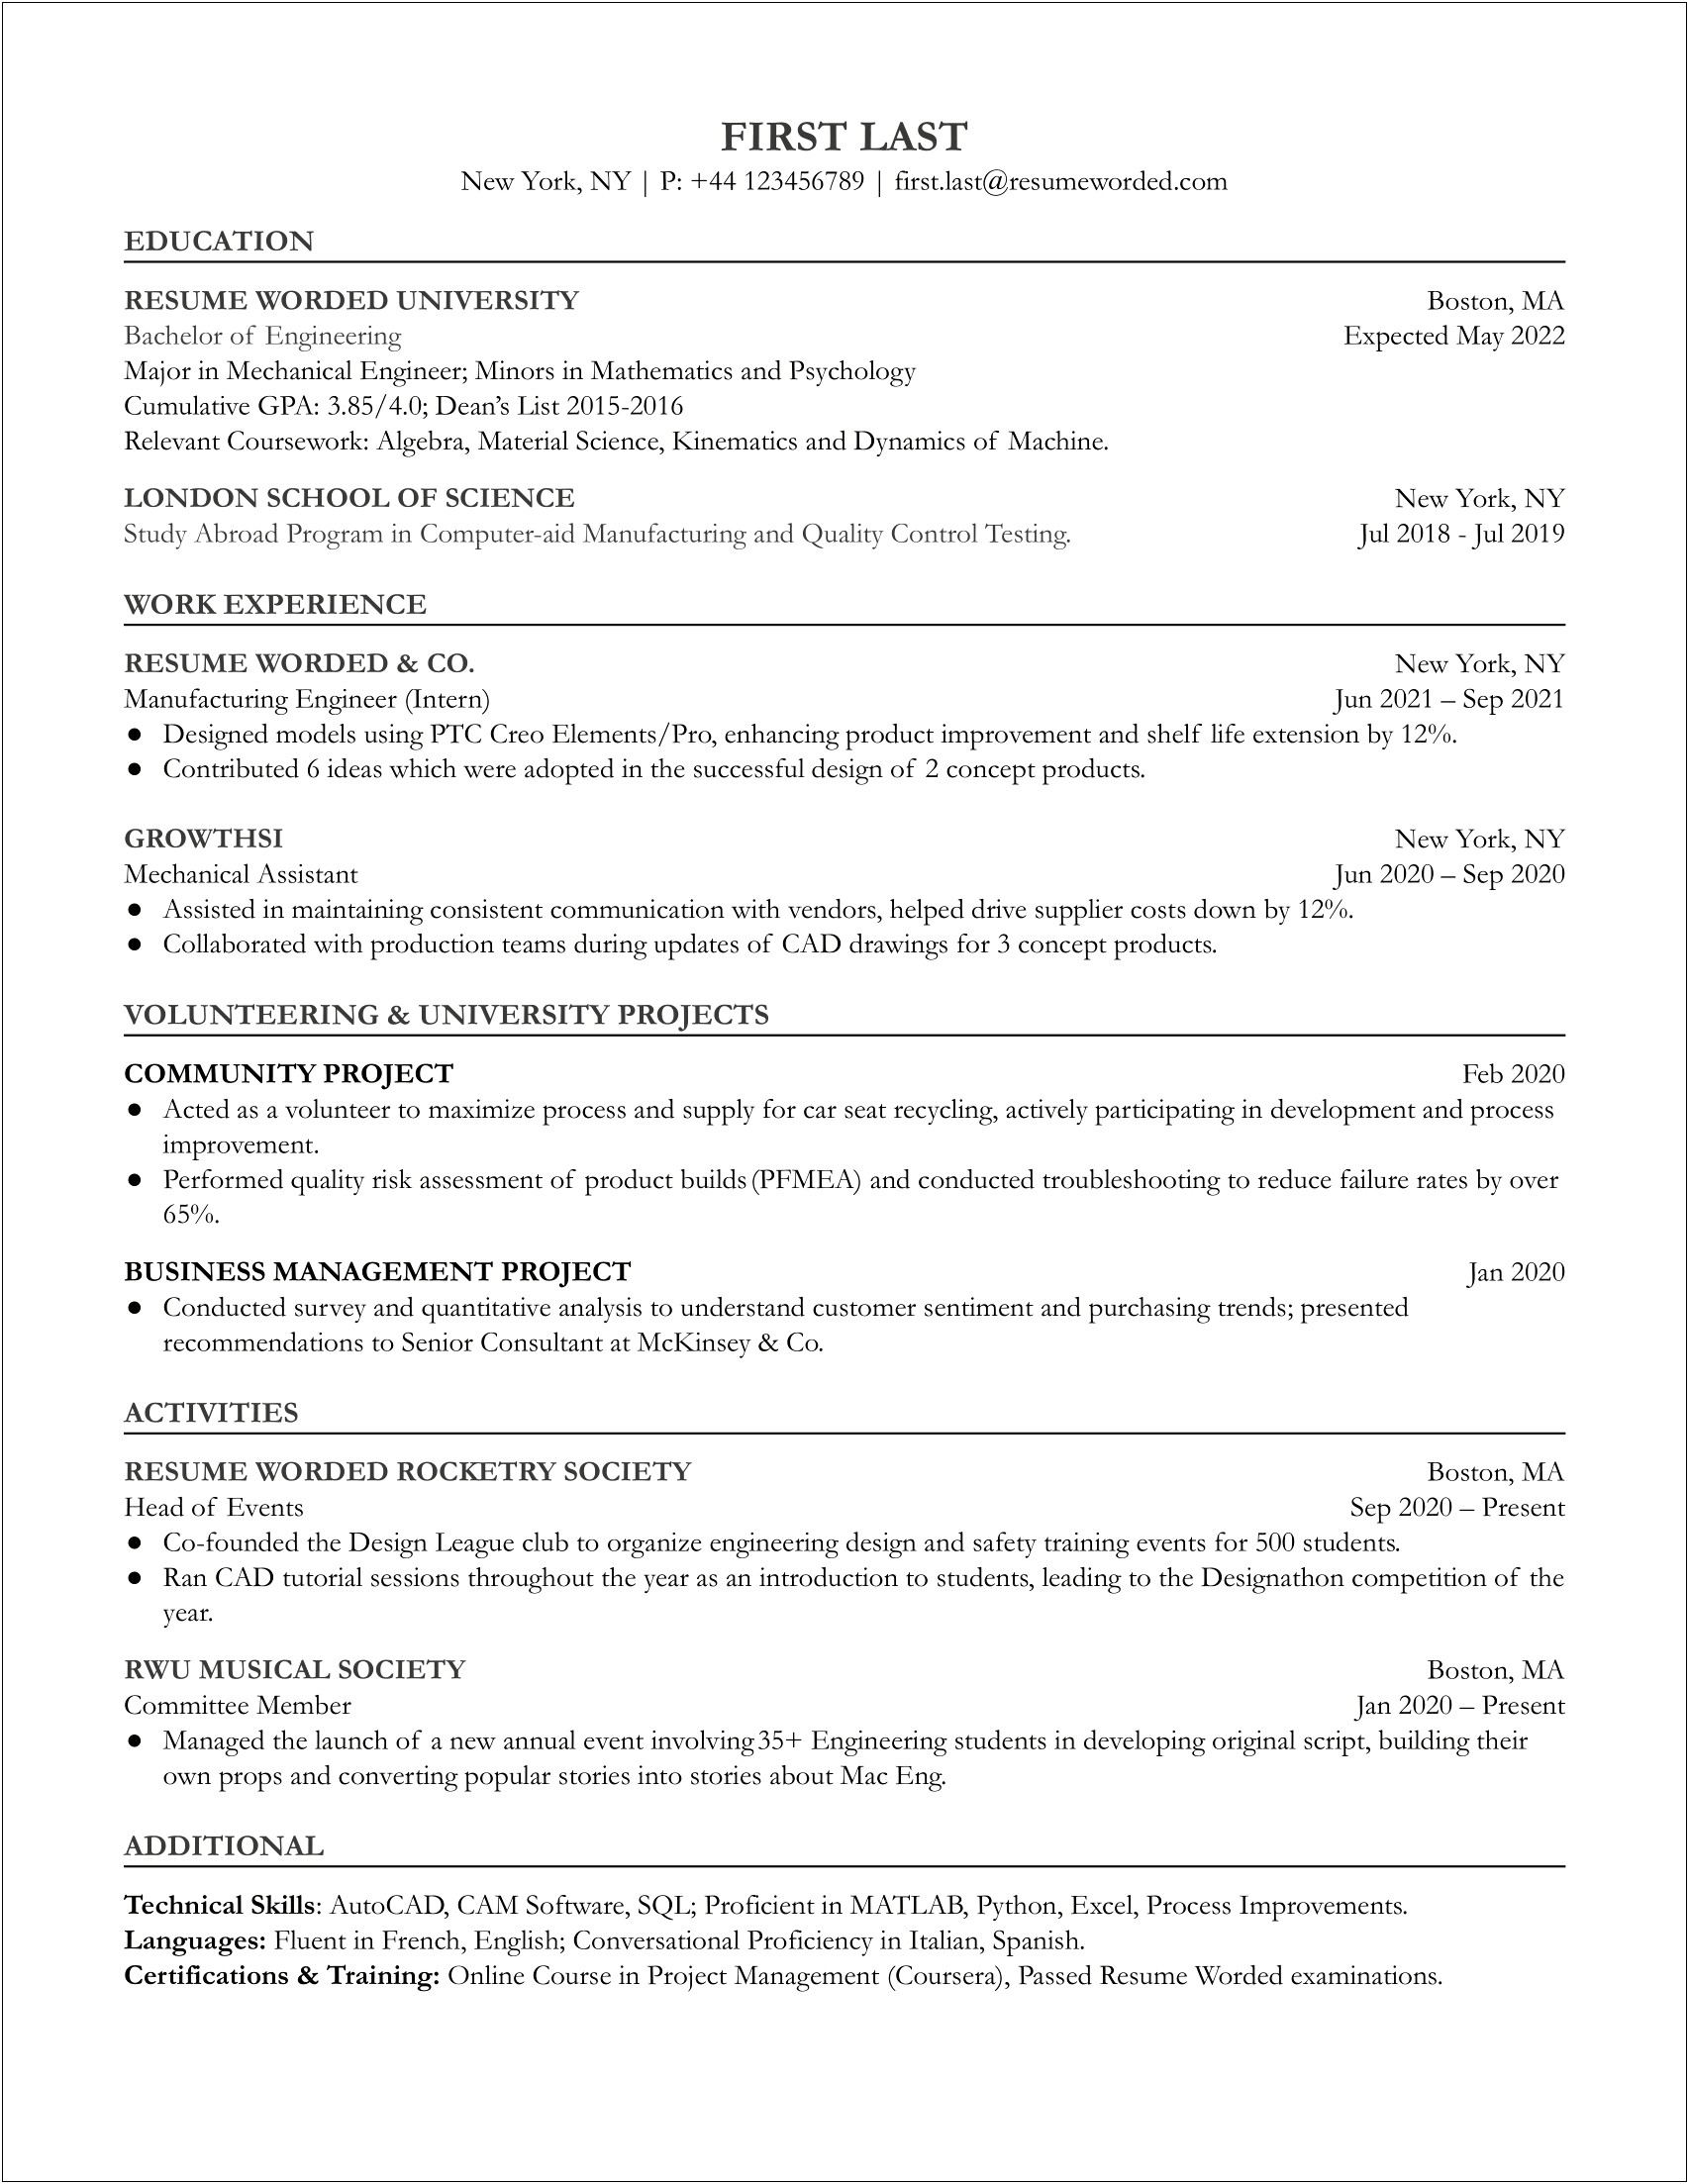 Example Process Engineer Entry Level Resume